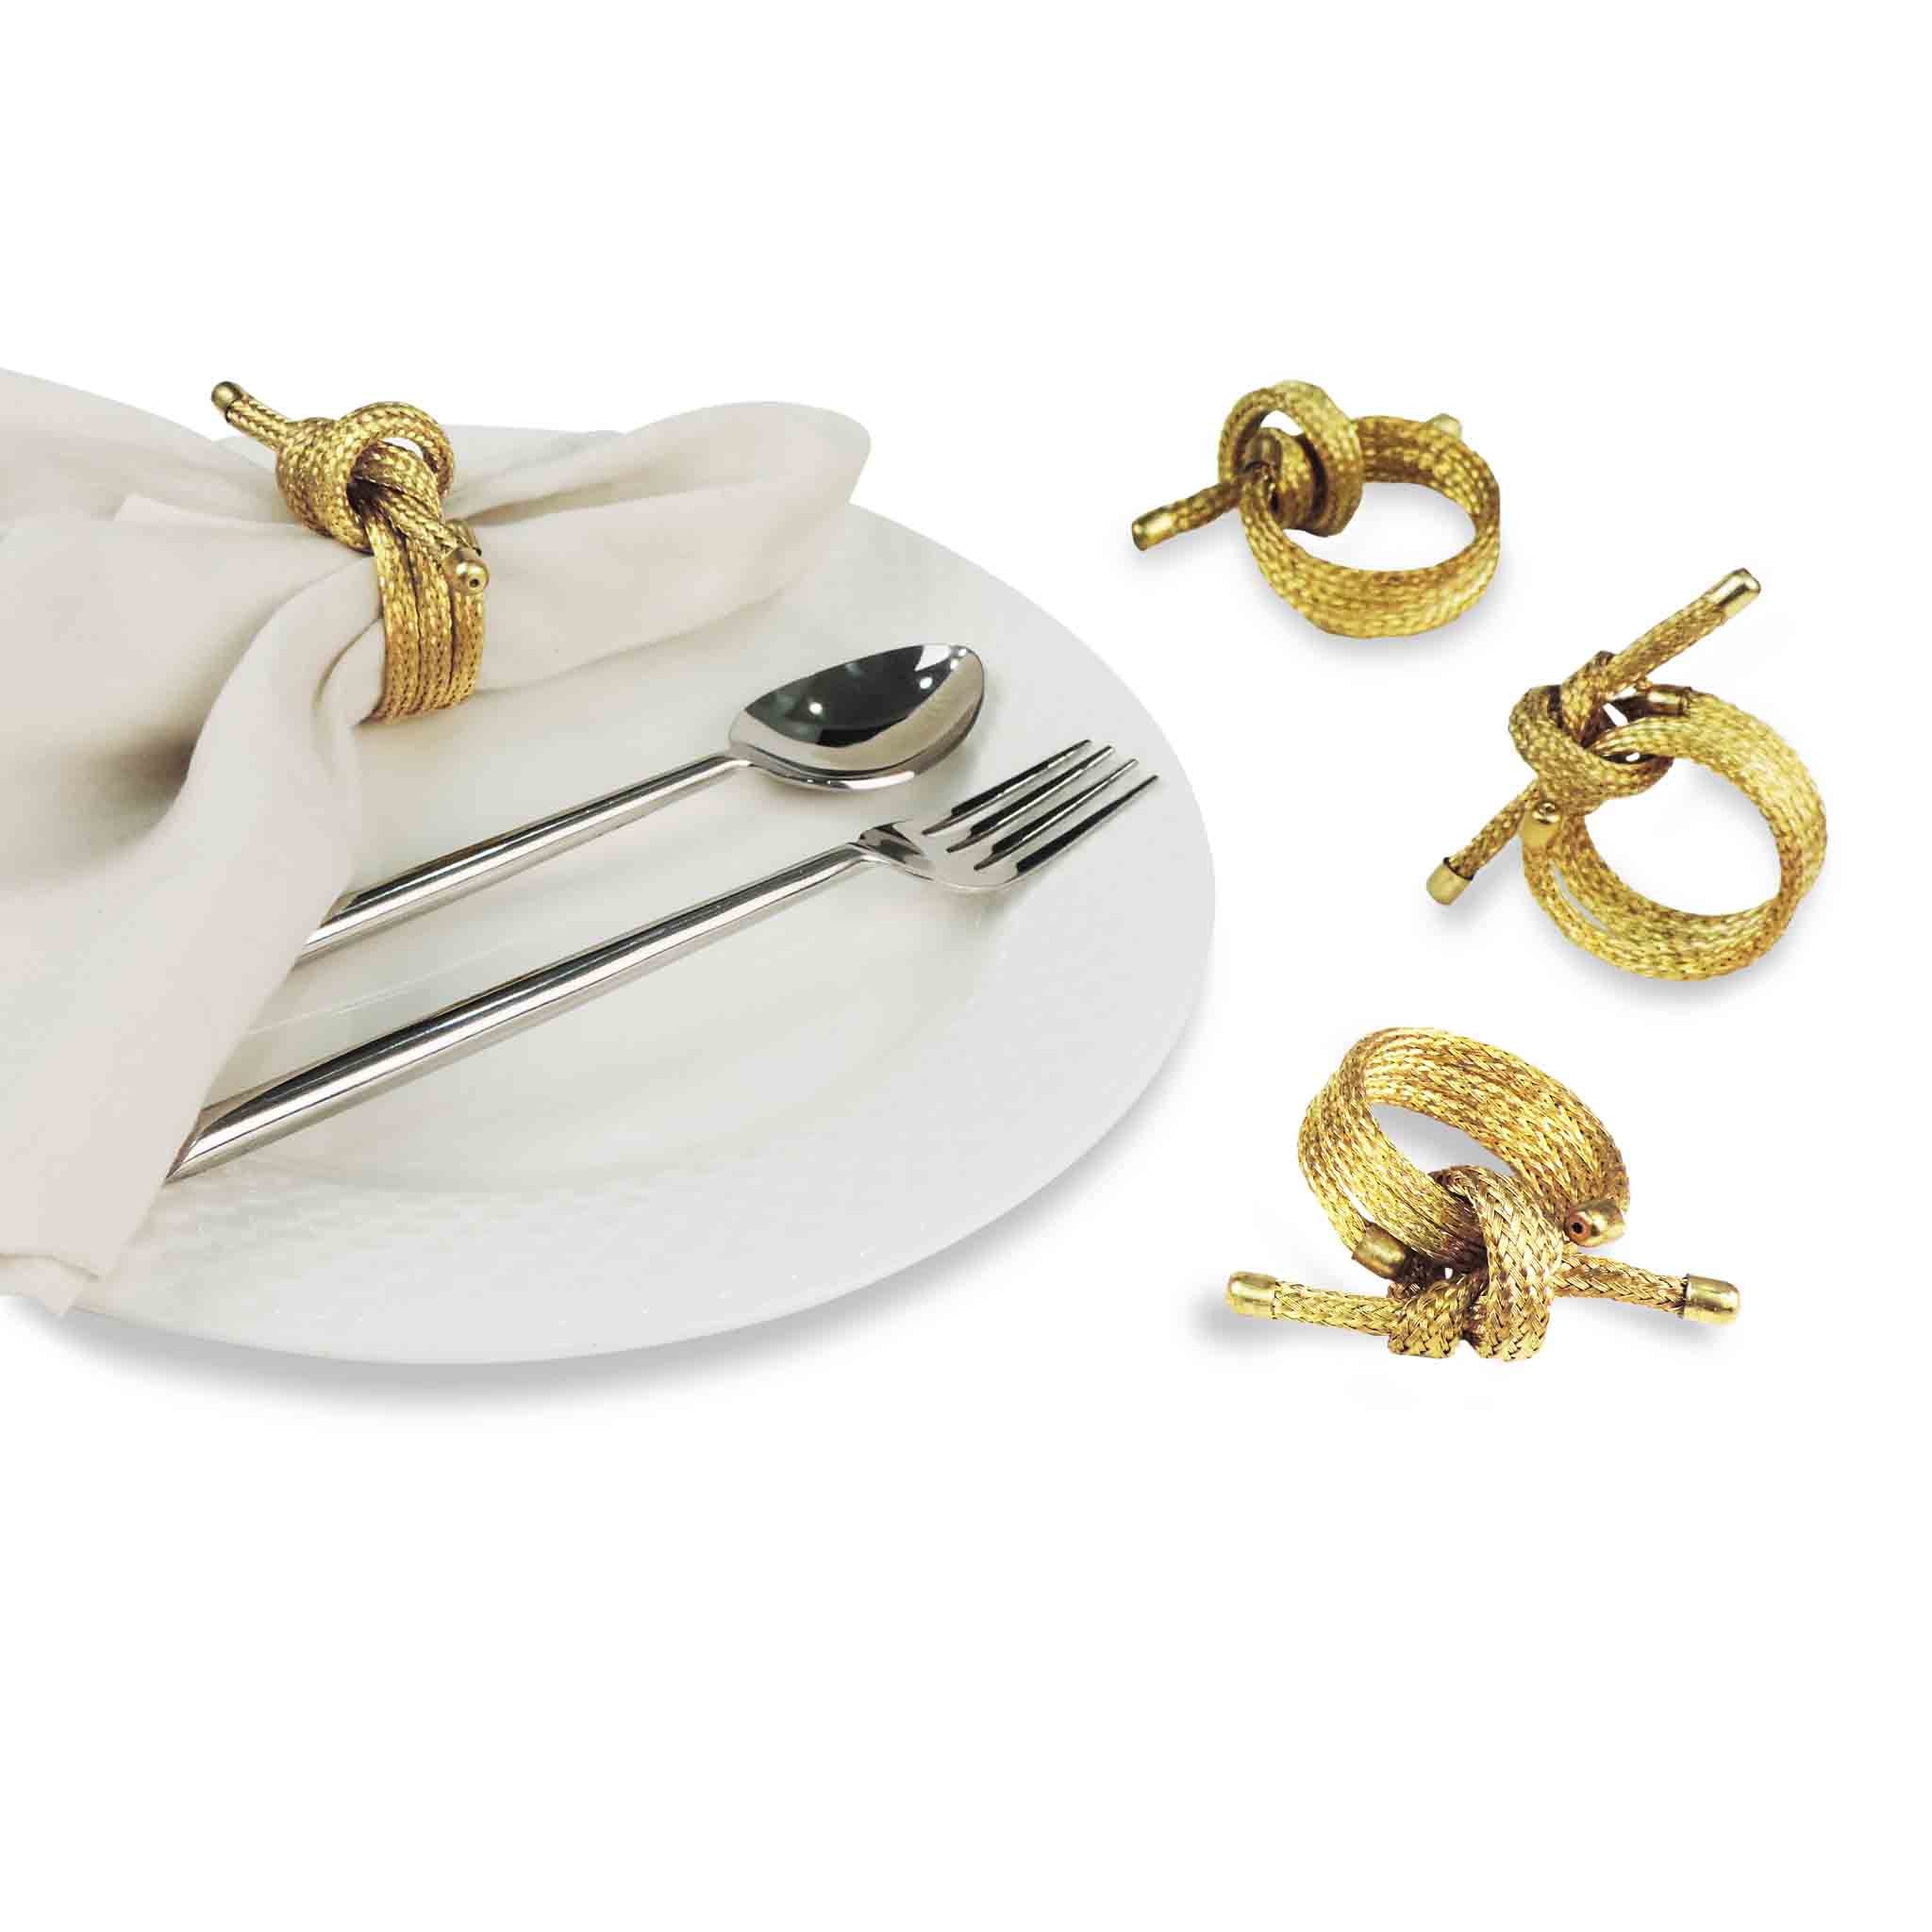 Top Knot Napkin Ring in Gold, Set of 4